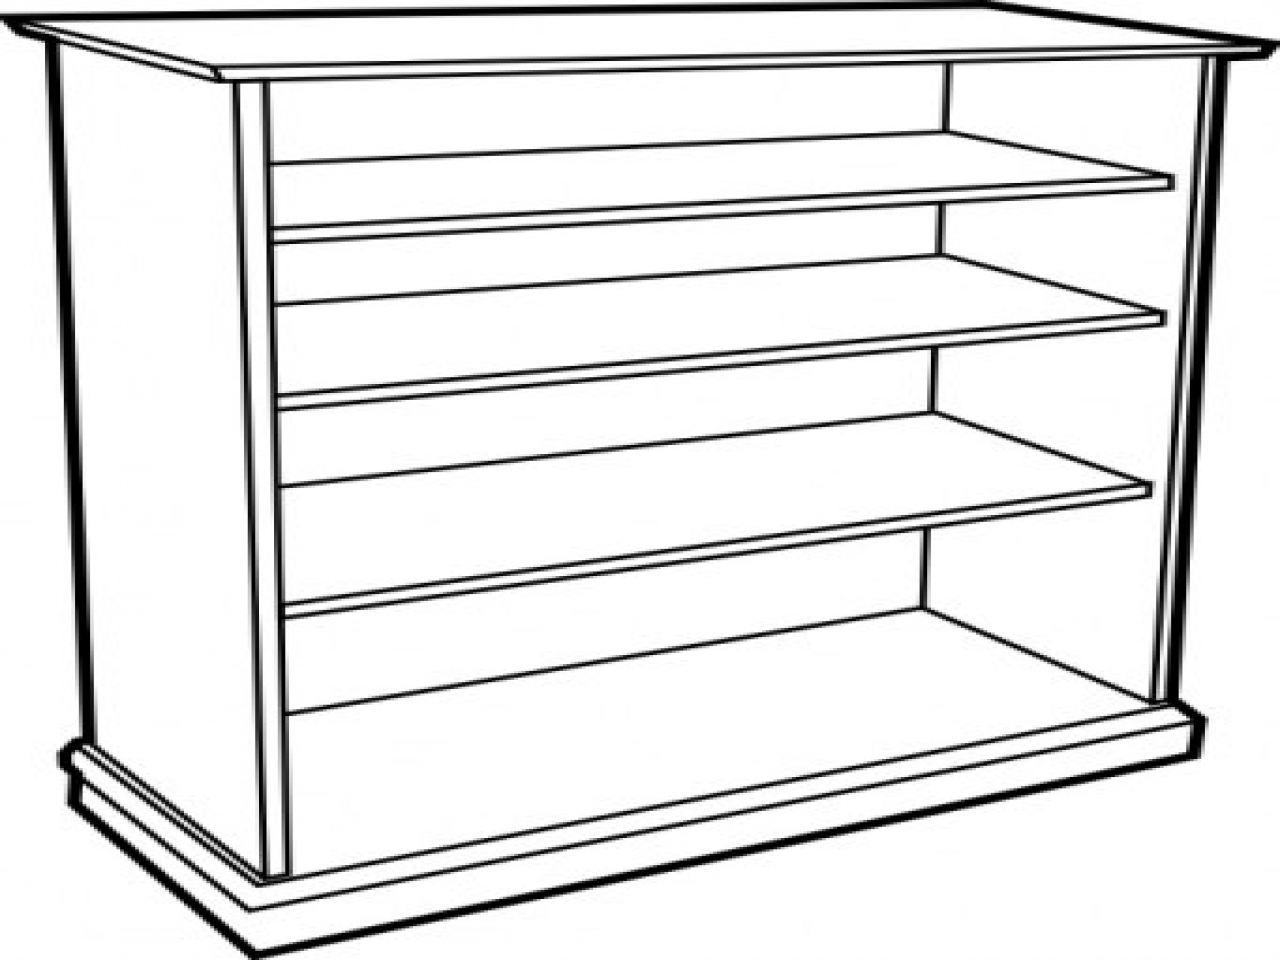 cupboard clipart black and white - Clip Art Library